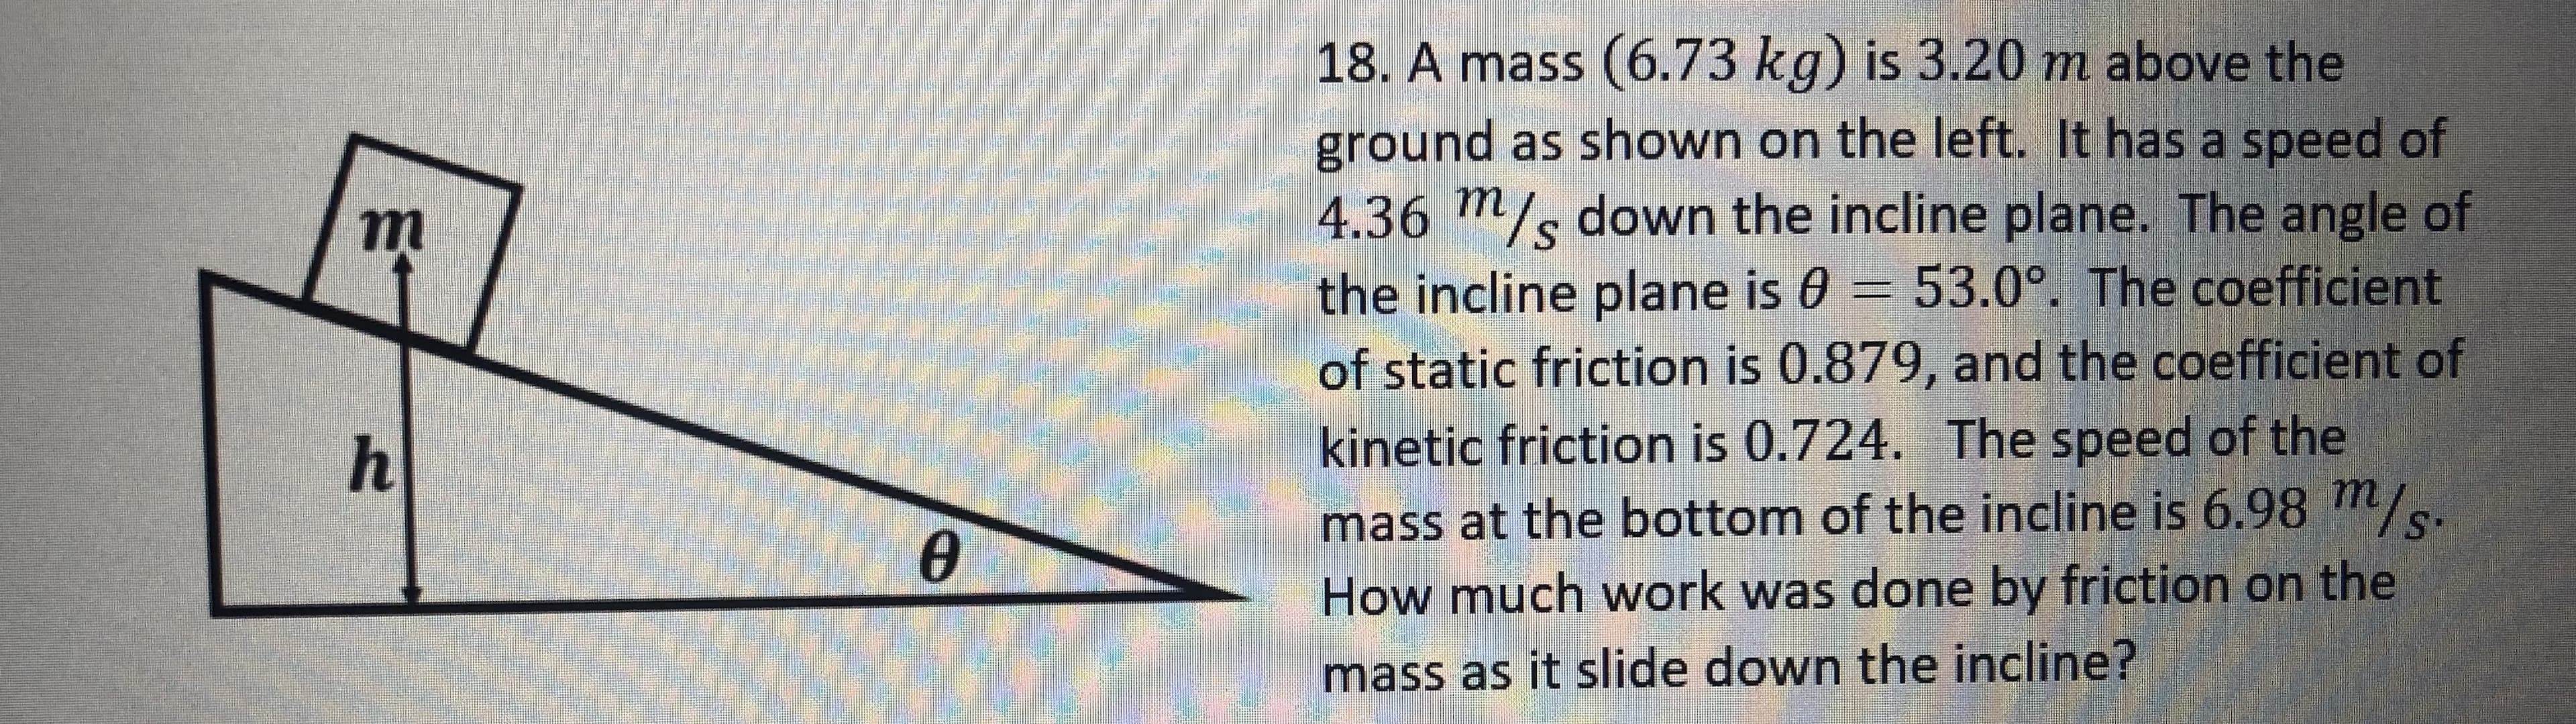 18. A mass (6.73 kg) is 3.20 m above the
ground as shown on the left. It has a speed of
4.36 m/s down the incline plane. The angle of
the incline plane is 0 = 53.0°. The coefficient
of static friction is 0.879, and the coefficient of
kinetic friction is 0.724. The speed of the
т
h
mass at the bottom of the incline is 6.98 m/.
How much work was done by friction on the
mass as it slide down the incline?
